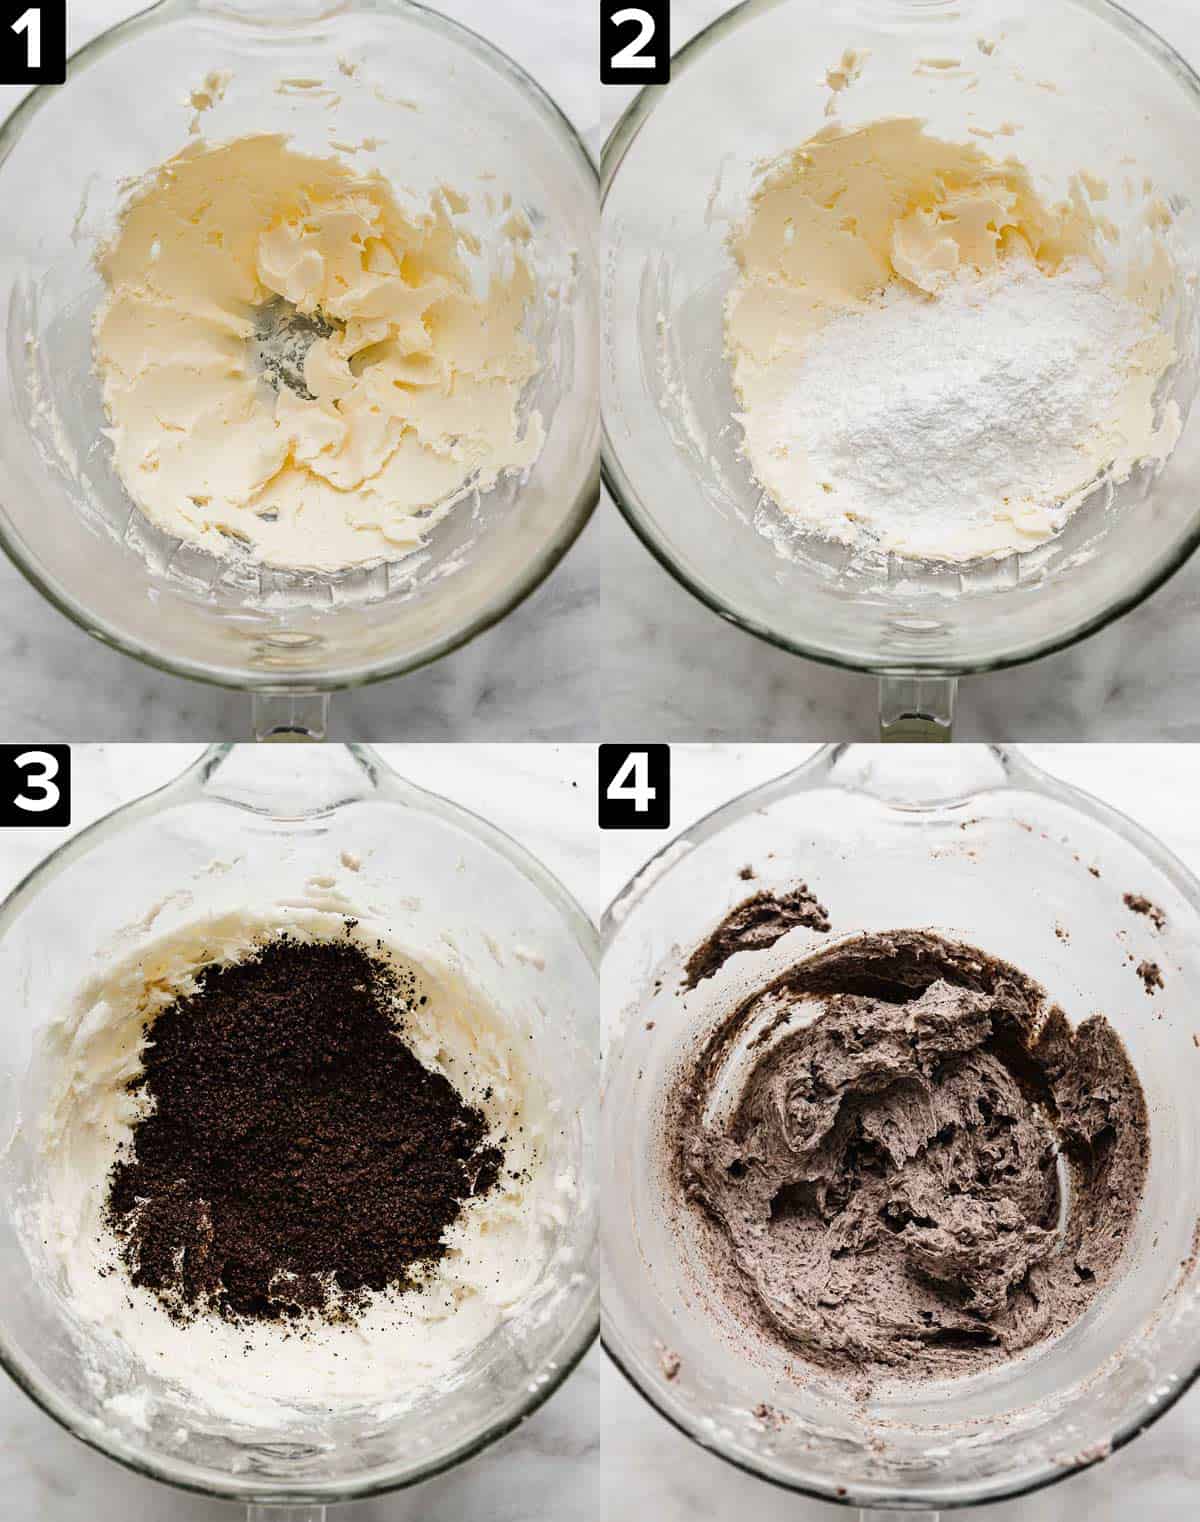 Four photos all featuring a glass mixing bowl on a white background, showing how to make Oreo frosting.